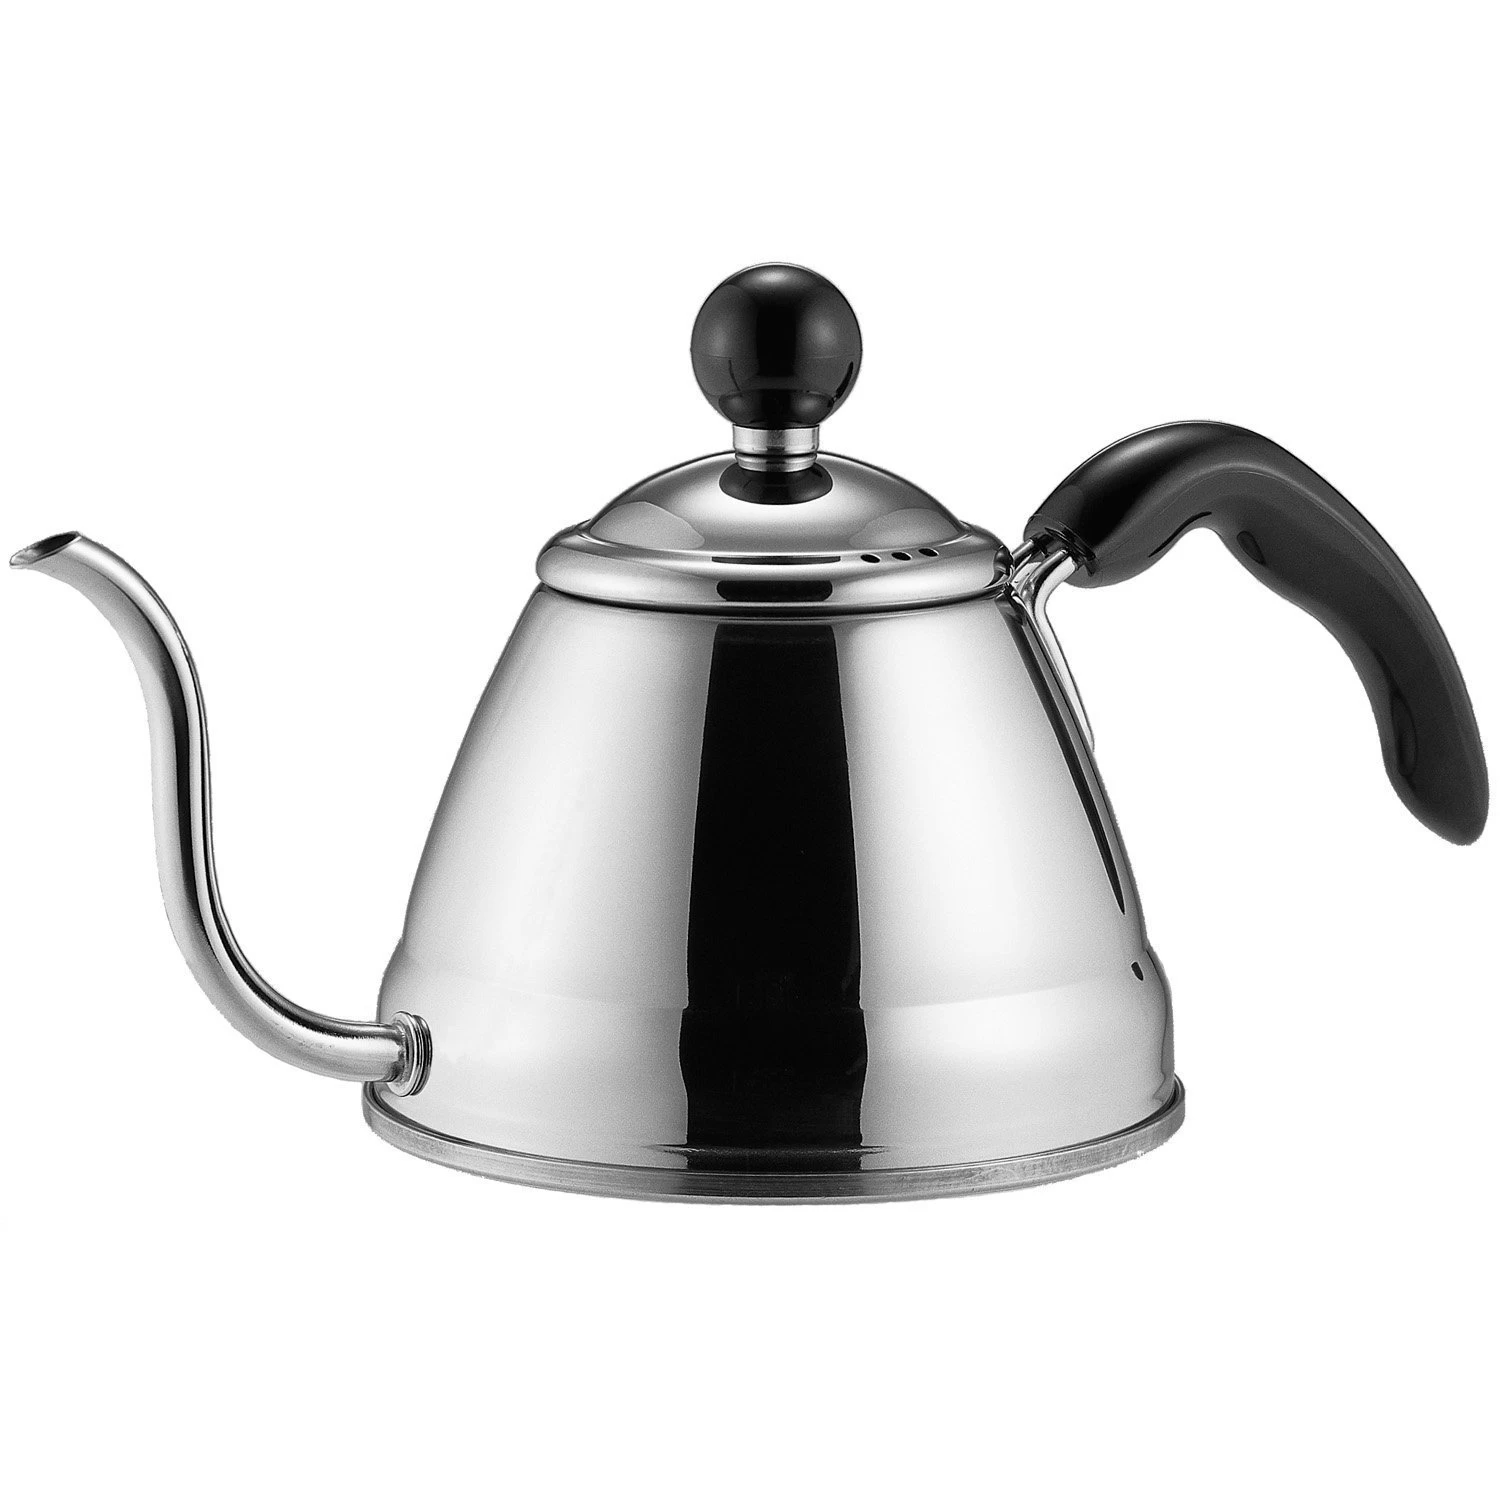 Reliable Quality Stainless Steel Tea Coffee Kettle Gooseneck Thin Spout for Pour Over Coffee